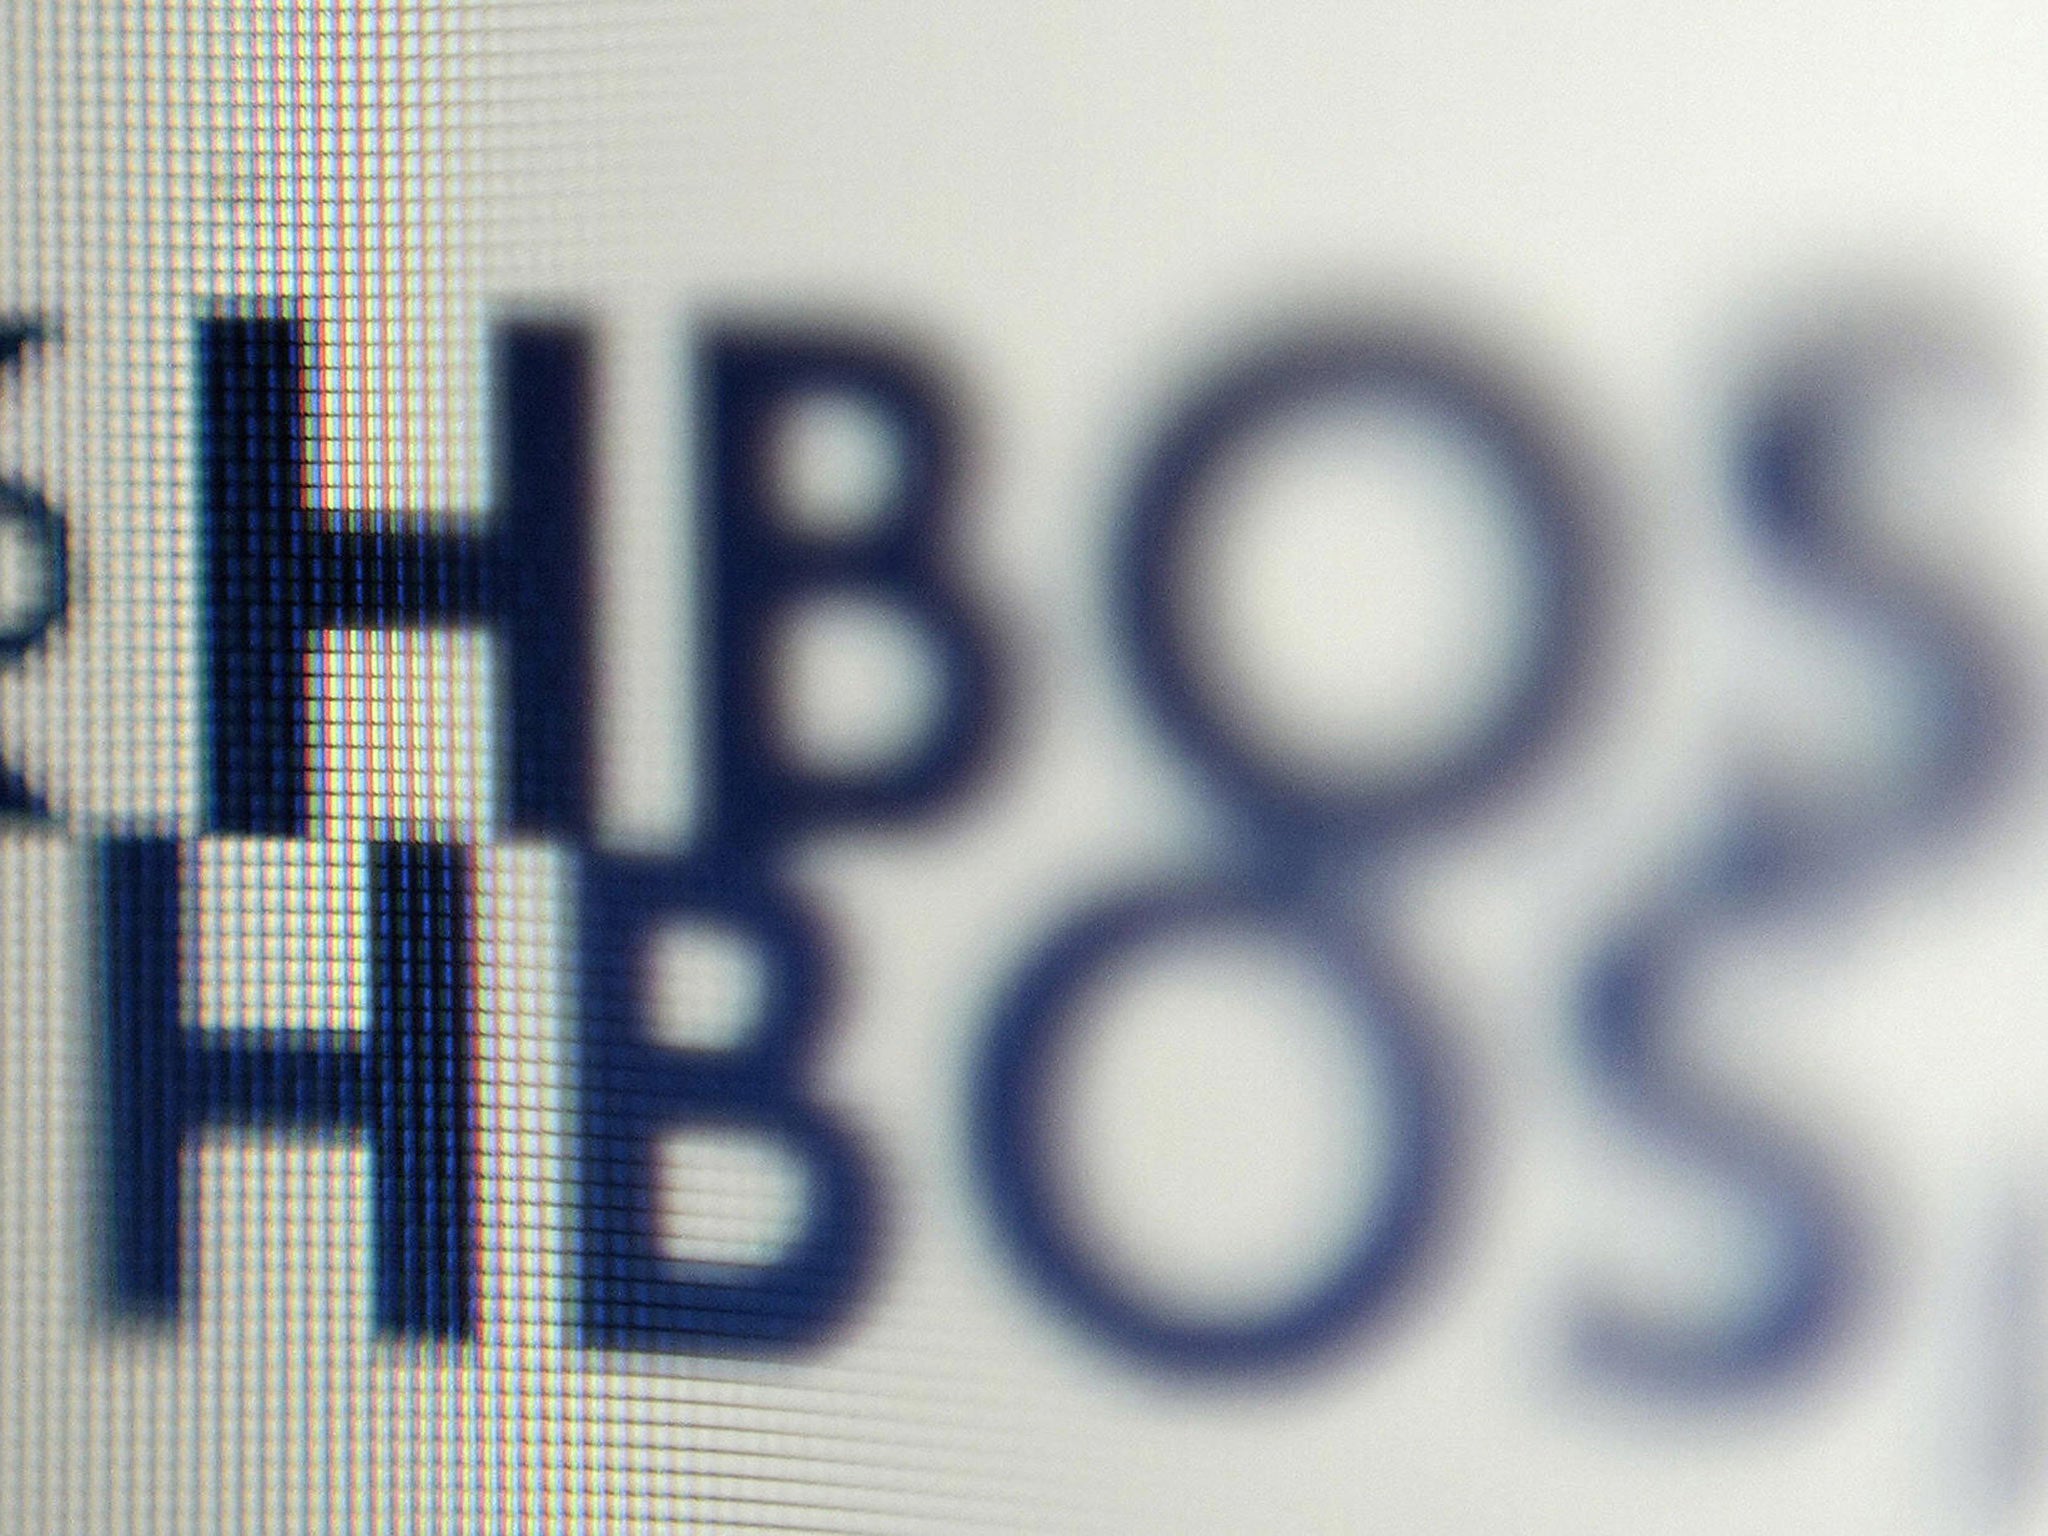 'Preliminary enquiries' are ongoing into KPMG's auditing of HBOs